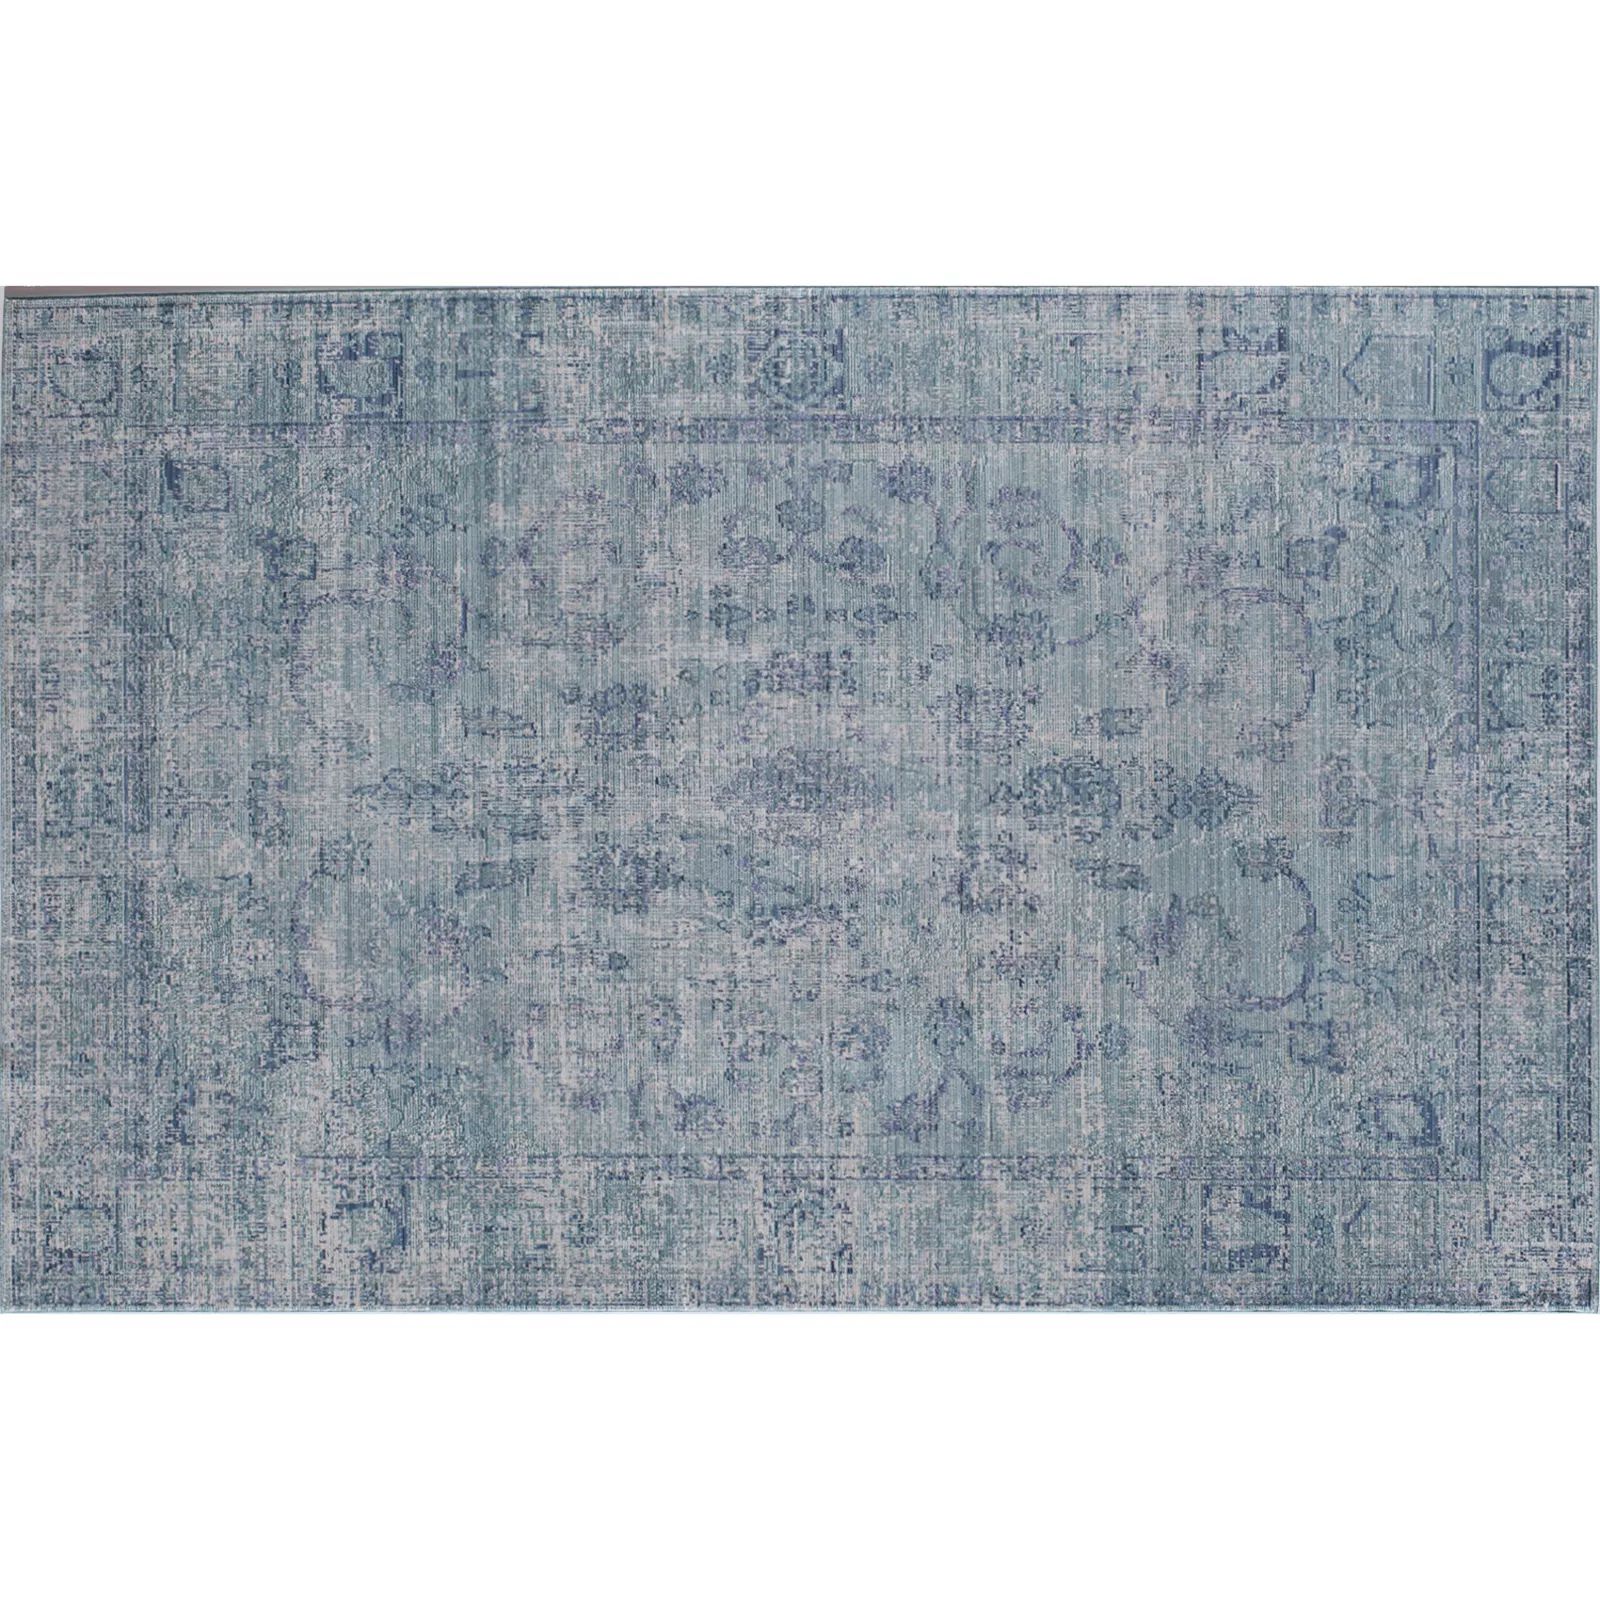 Rugs America Asteria Faded Framed Floral Rug, Blue, 5X8 Ft | Kohl's